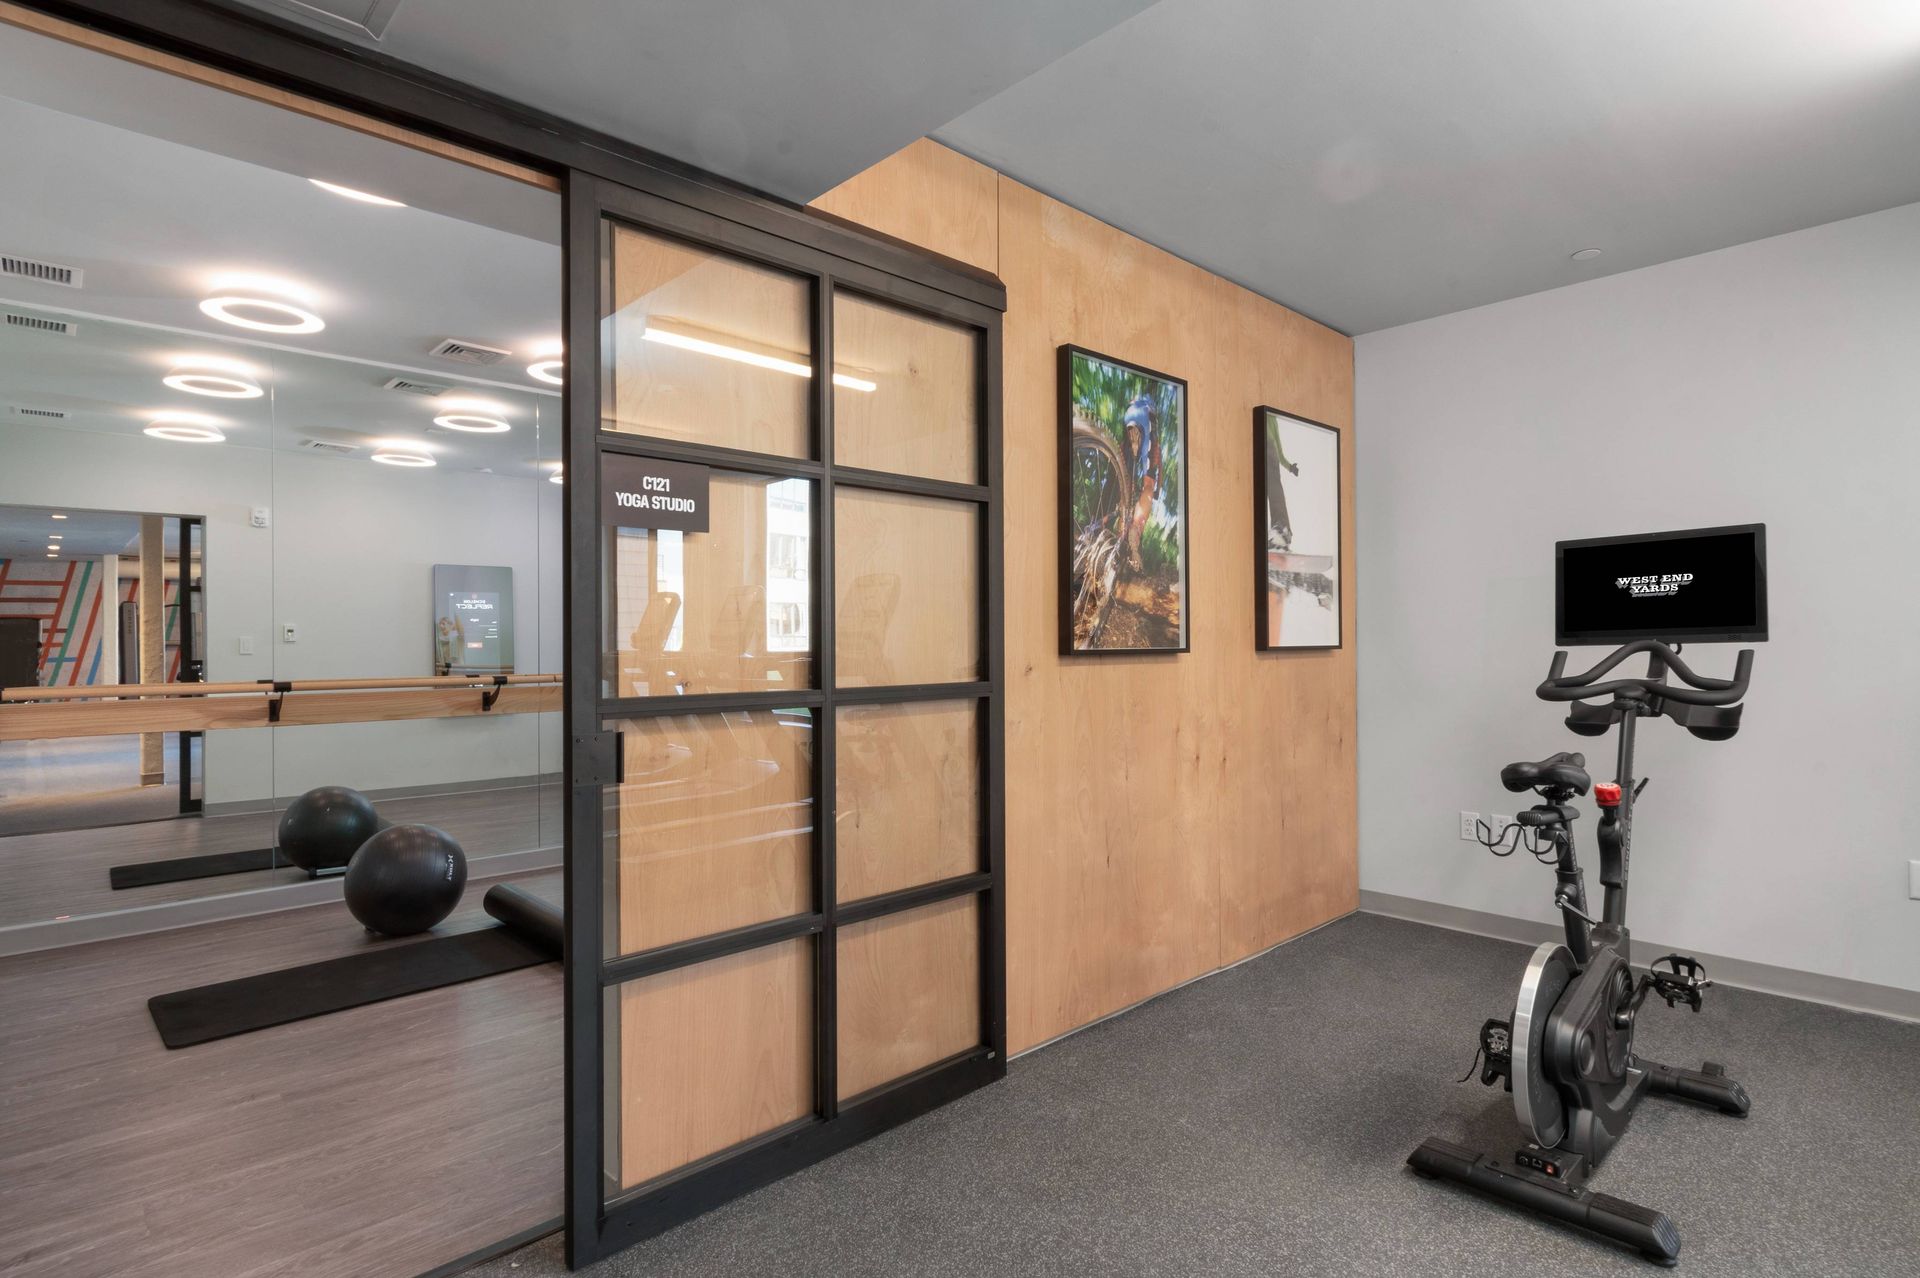 West End Yards modern fitness center with yoga room.